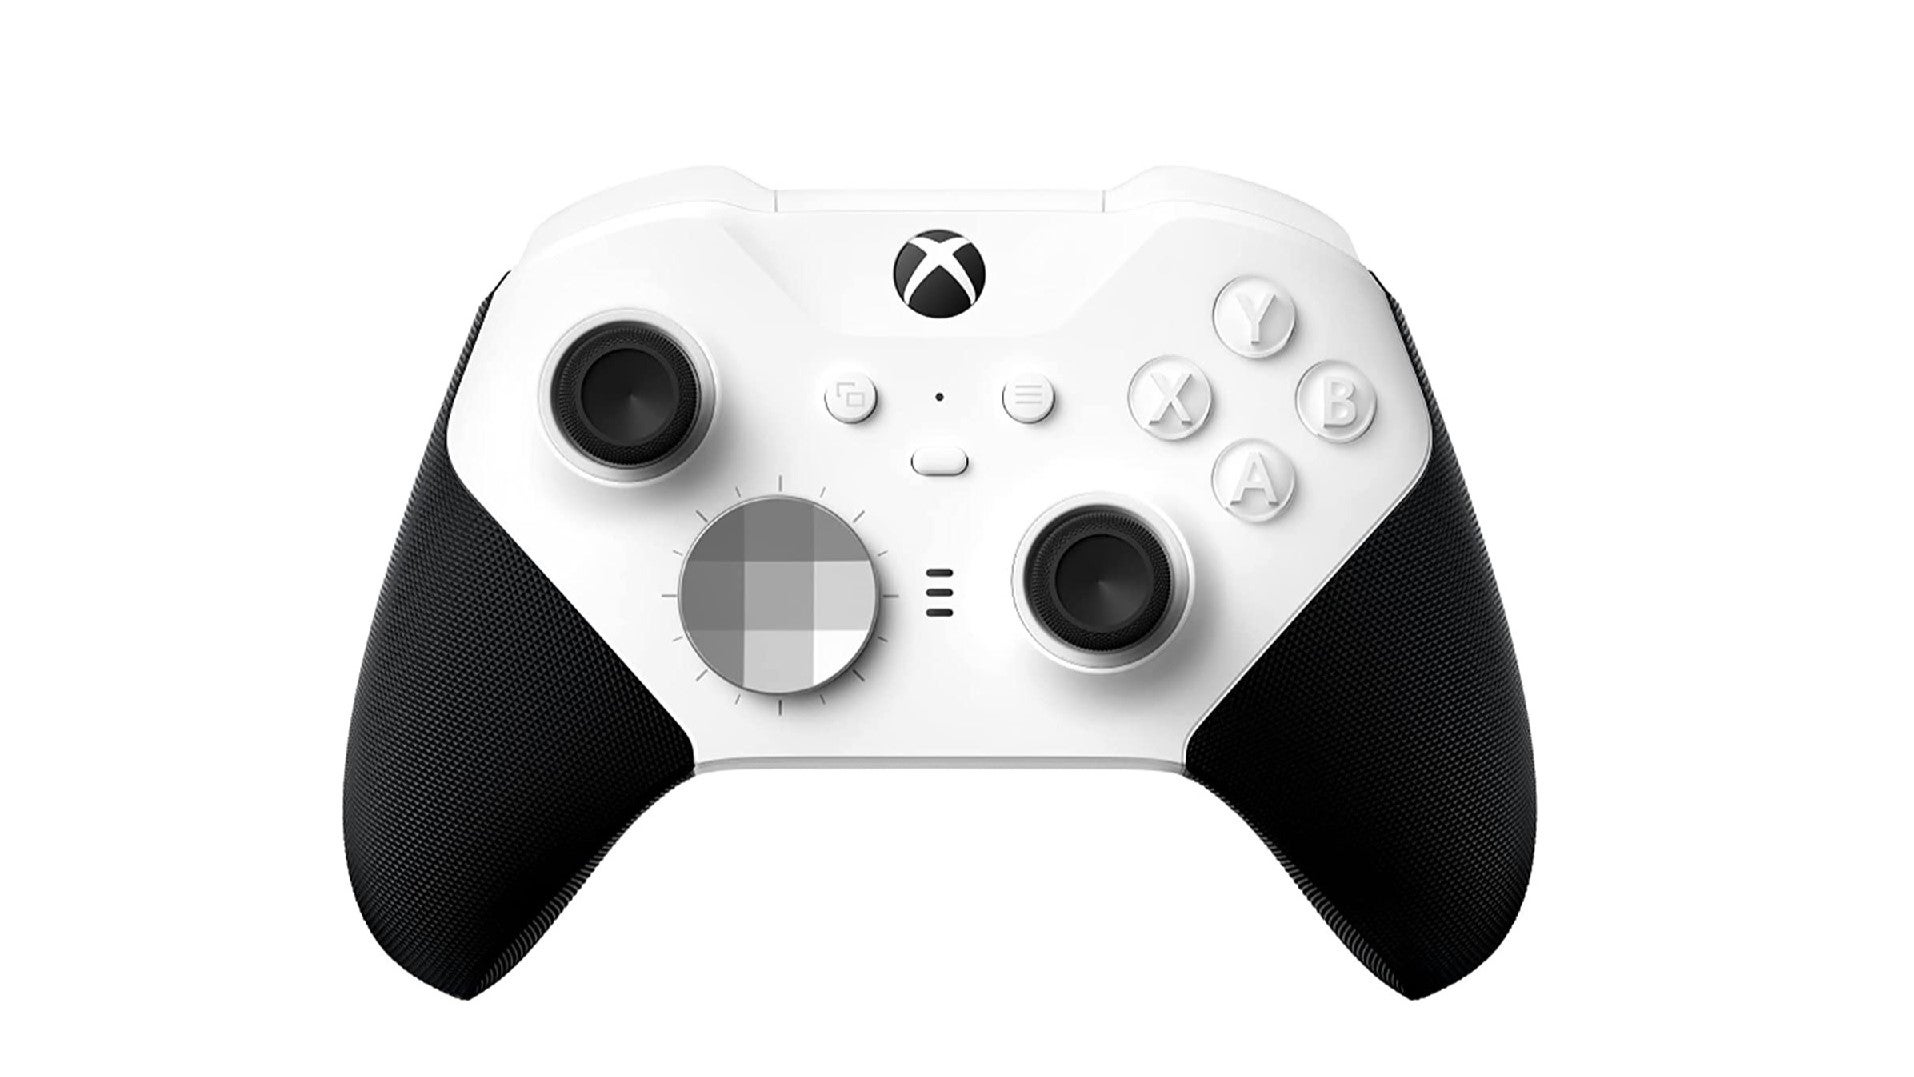 Listing photo for the Xbox Elite Series 2 controller